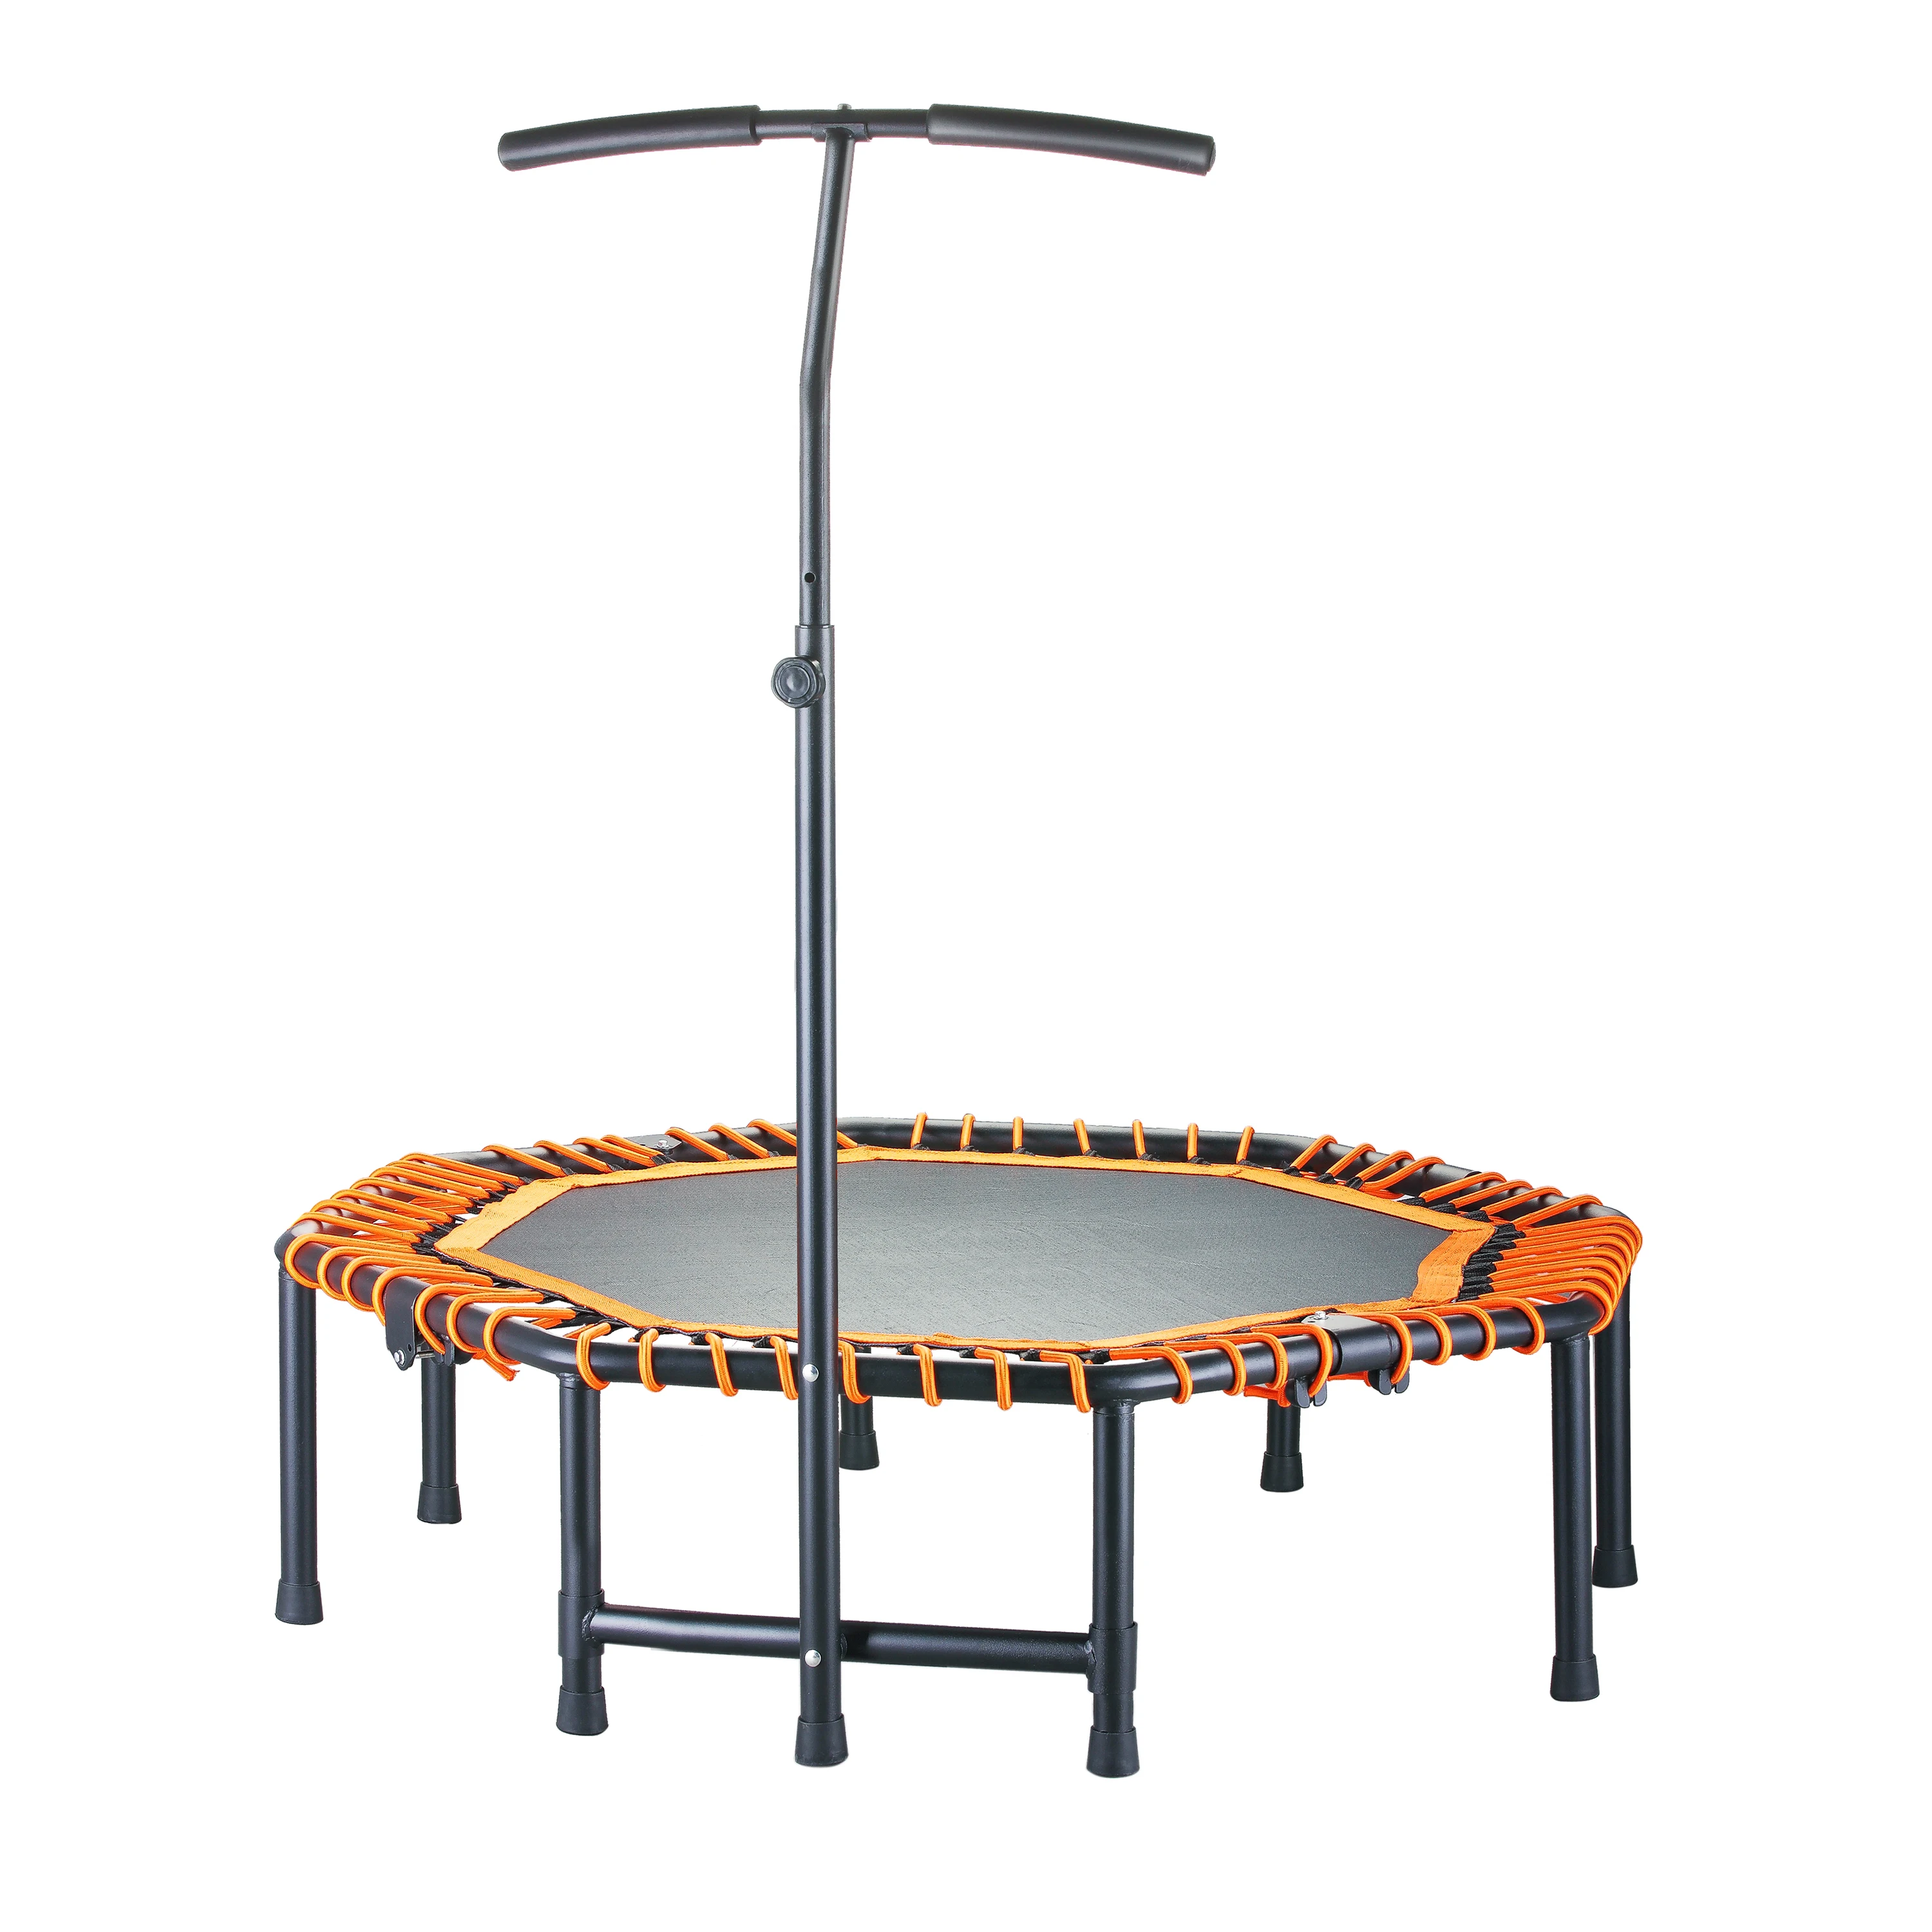 Fitness Trampoline Indoor Trampoline Gardentrampoline Outdoor Trampoline 45 Inch 48 Inch Buy Fitness Trampoline Trampolin Trampolines Aldi Trampoline 8x12 Trampoline With Enclosure Net Or Witout Enclosure Net 16ft Rectangular Trampoline Round